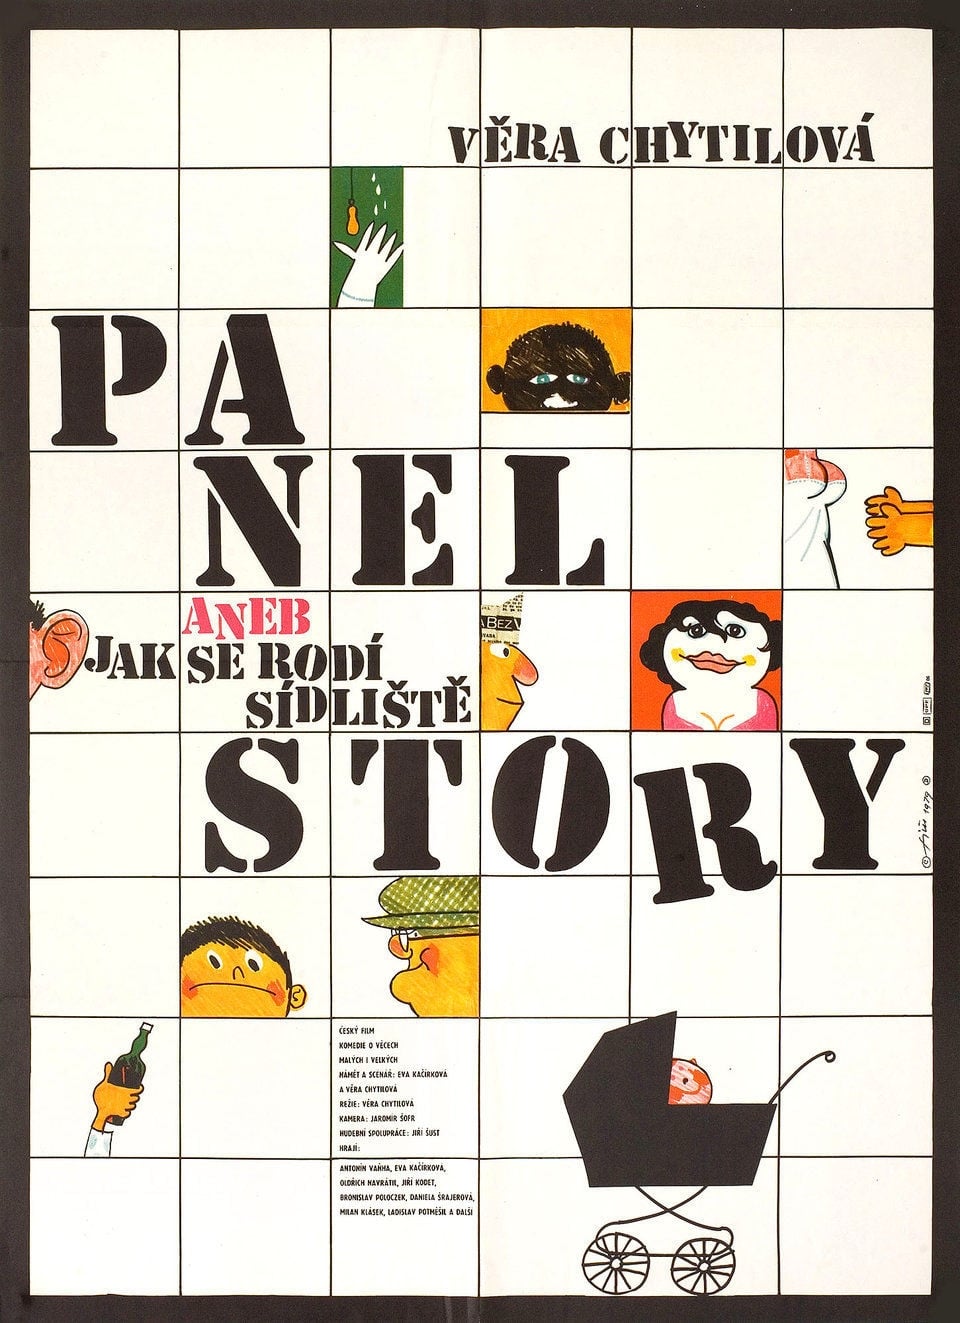 Panelstory or Birth of a Community (1980)